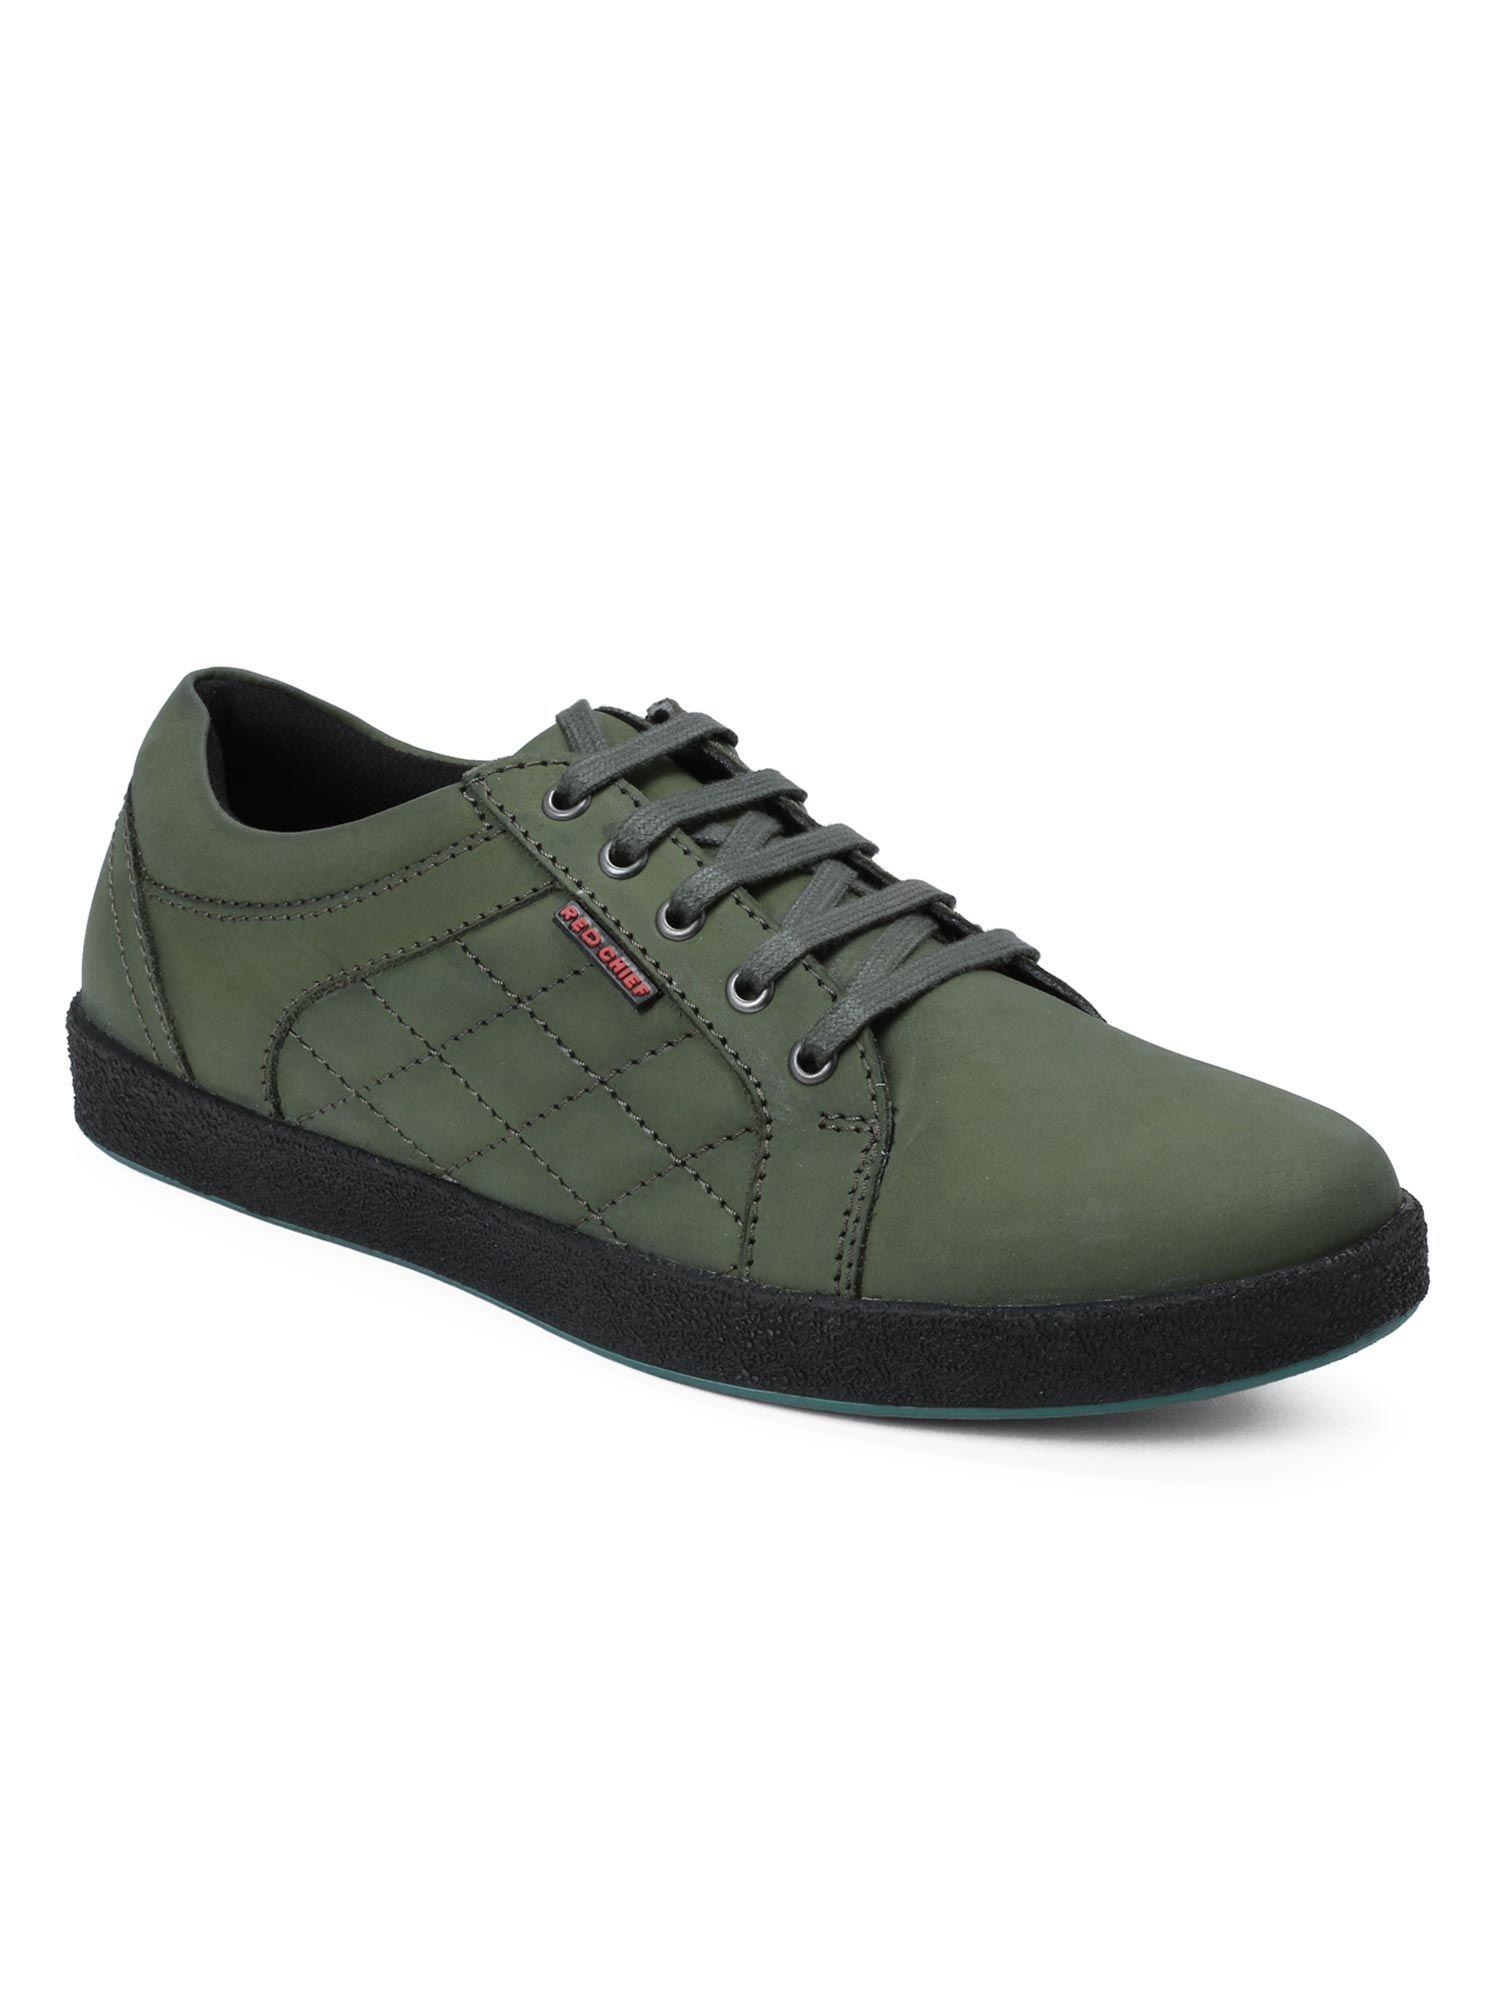 green leather sneaker shoes